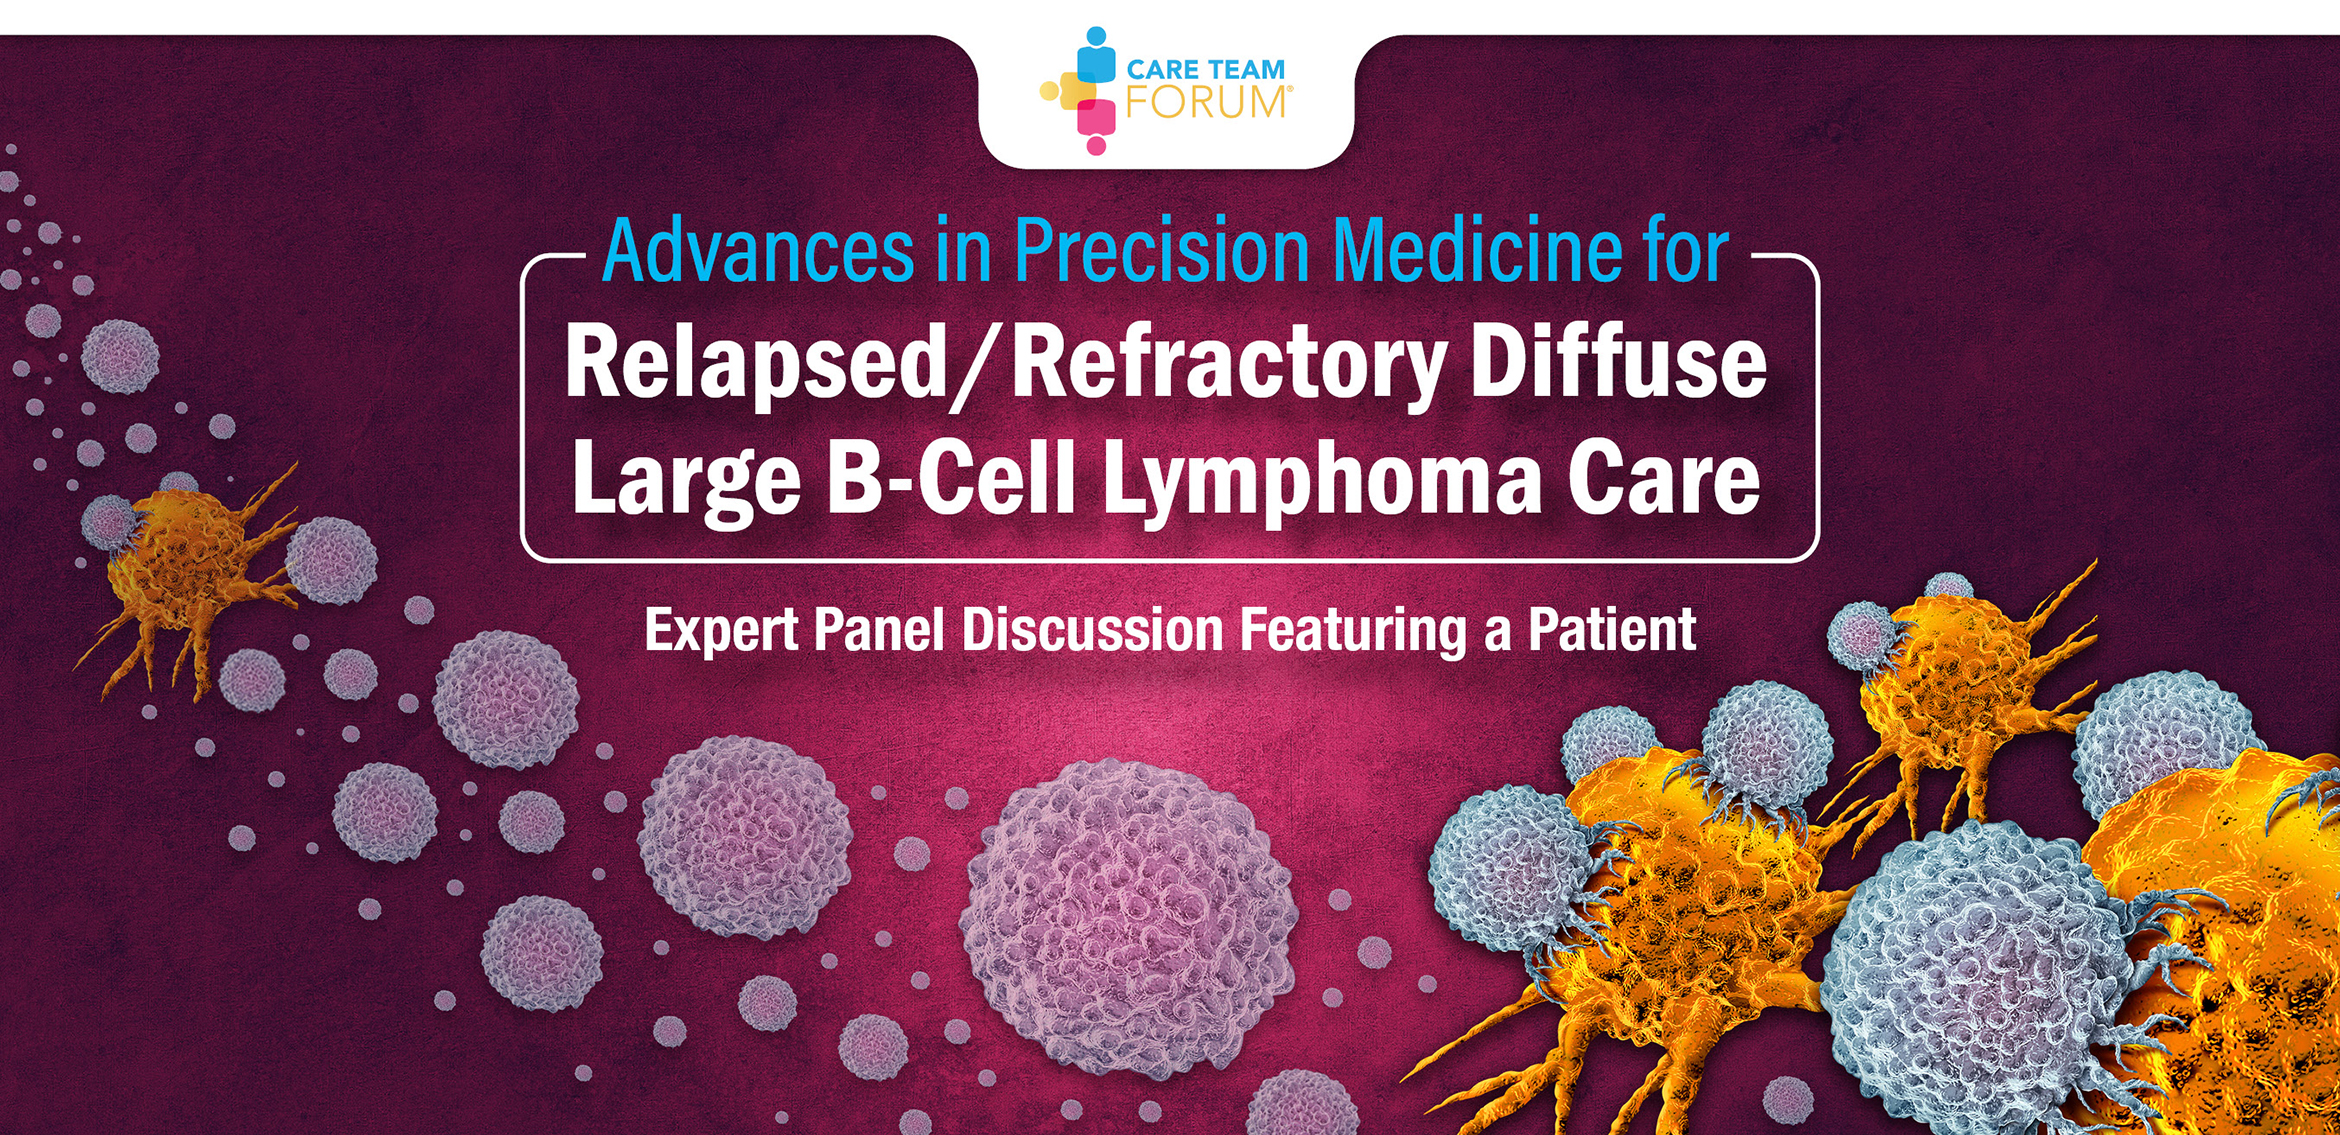 Advances in Precision Medicine for Relapsed/Refractory Diffuse Large B-Cell Lymphoma Care